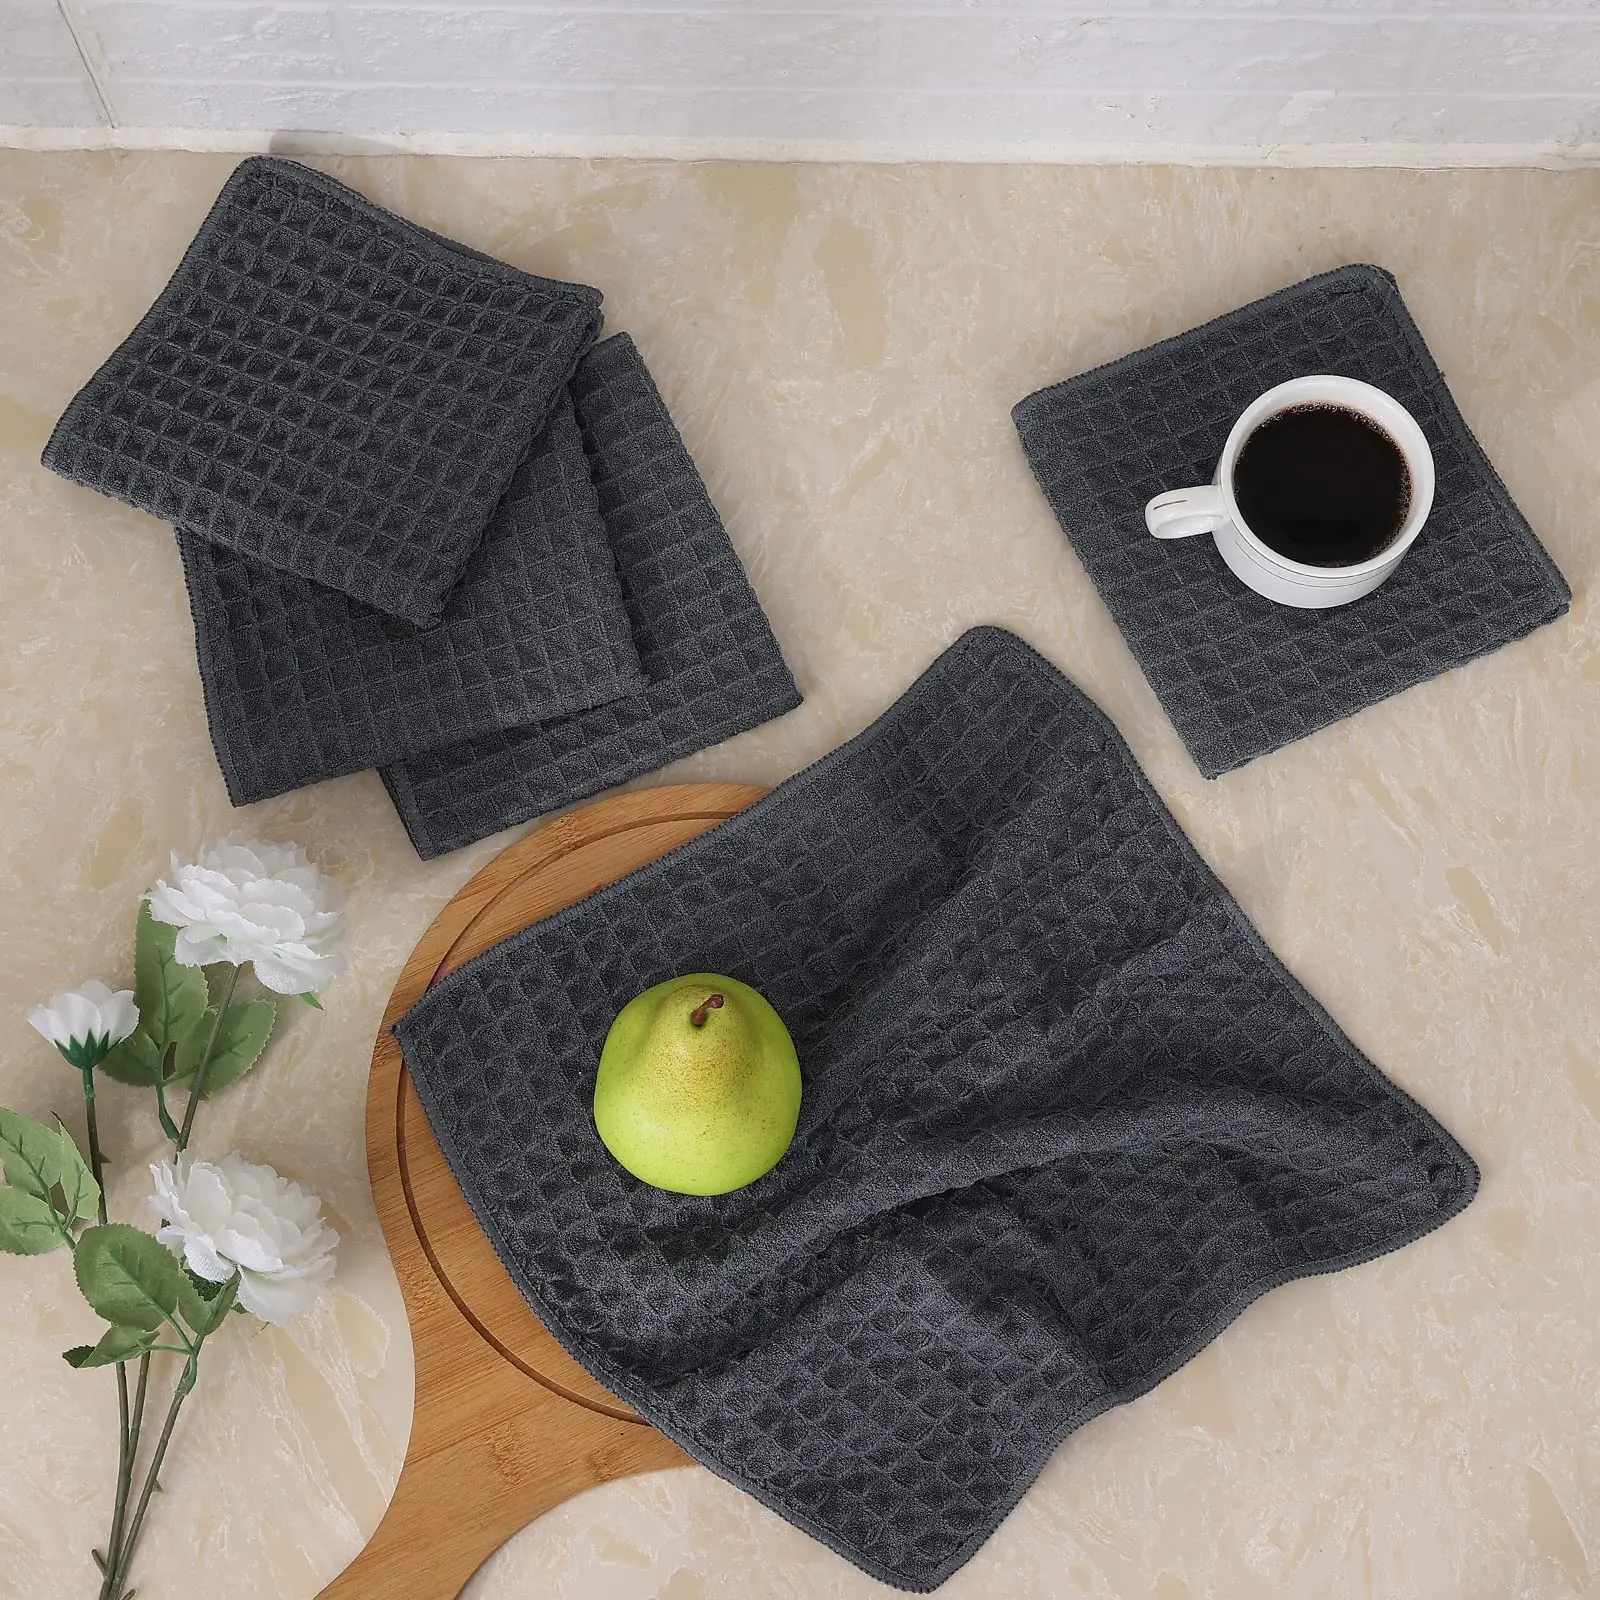 https://ae01.alicdn.com/kf/S9ab4f1f36c3d45c4af109af3e0226966c/Homaxy-2pcs-Microfiber-Kitchen-Towel-Waffle-Weave-Dishcloth-Absorbent-Kitchen-Cloths-Fast-Drying-Scouring-Pad-Cleaning.jpg